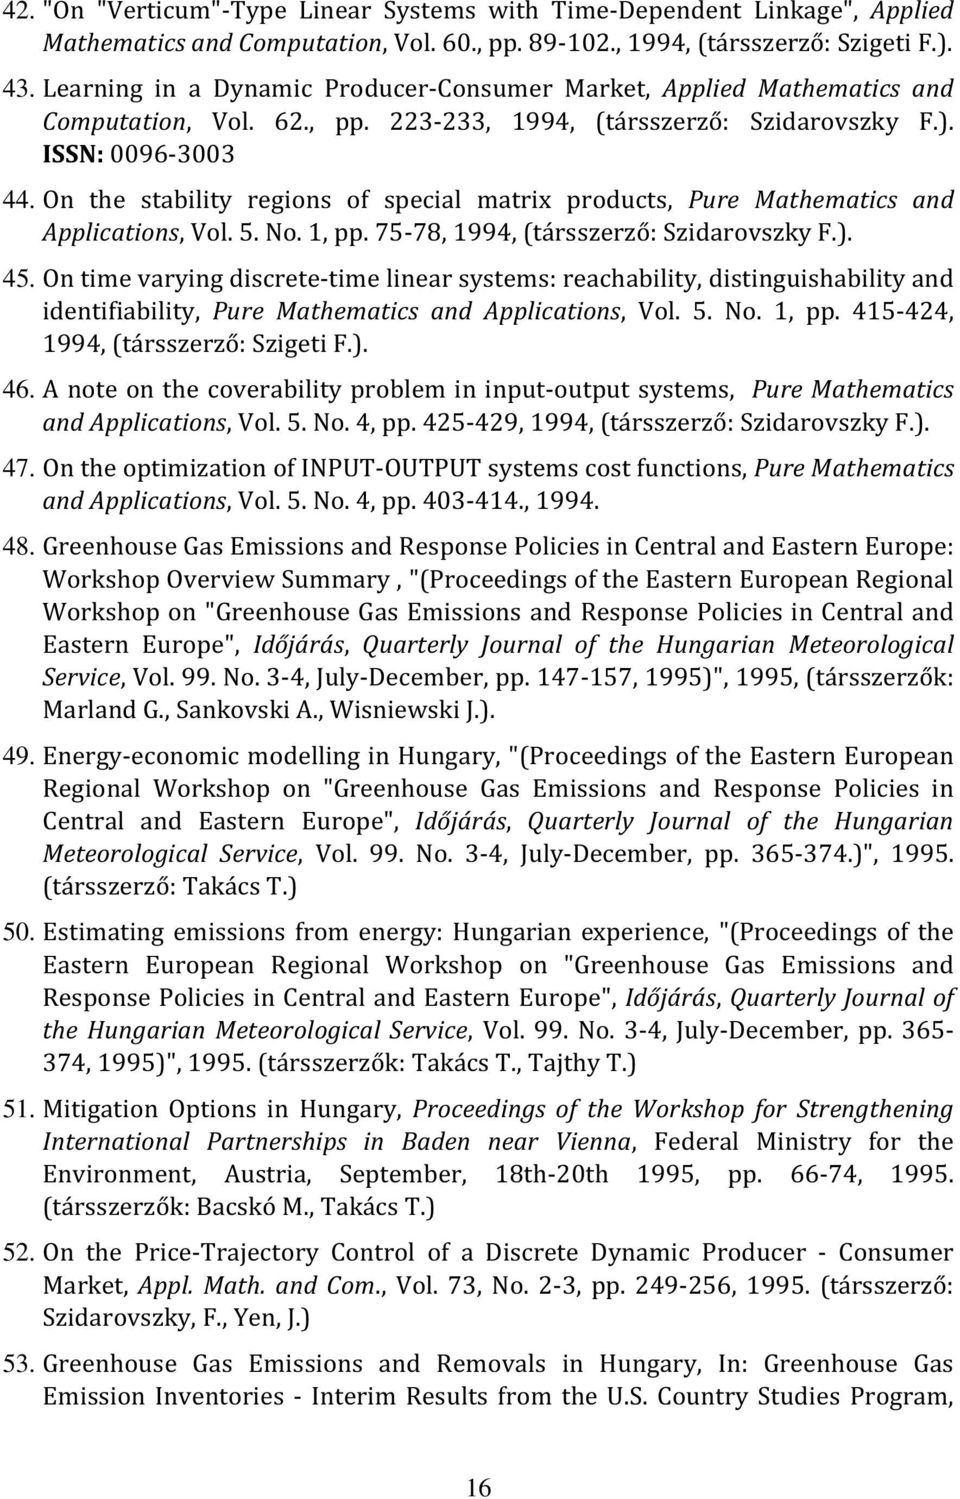 On the stability regions of special matrix products, Pure Mathematics and Applications, Vol. 5. No. 1, pp. 75-78, 1994, (társszerző: Szidarovszky F.). 45.